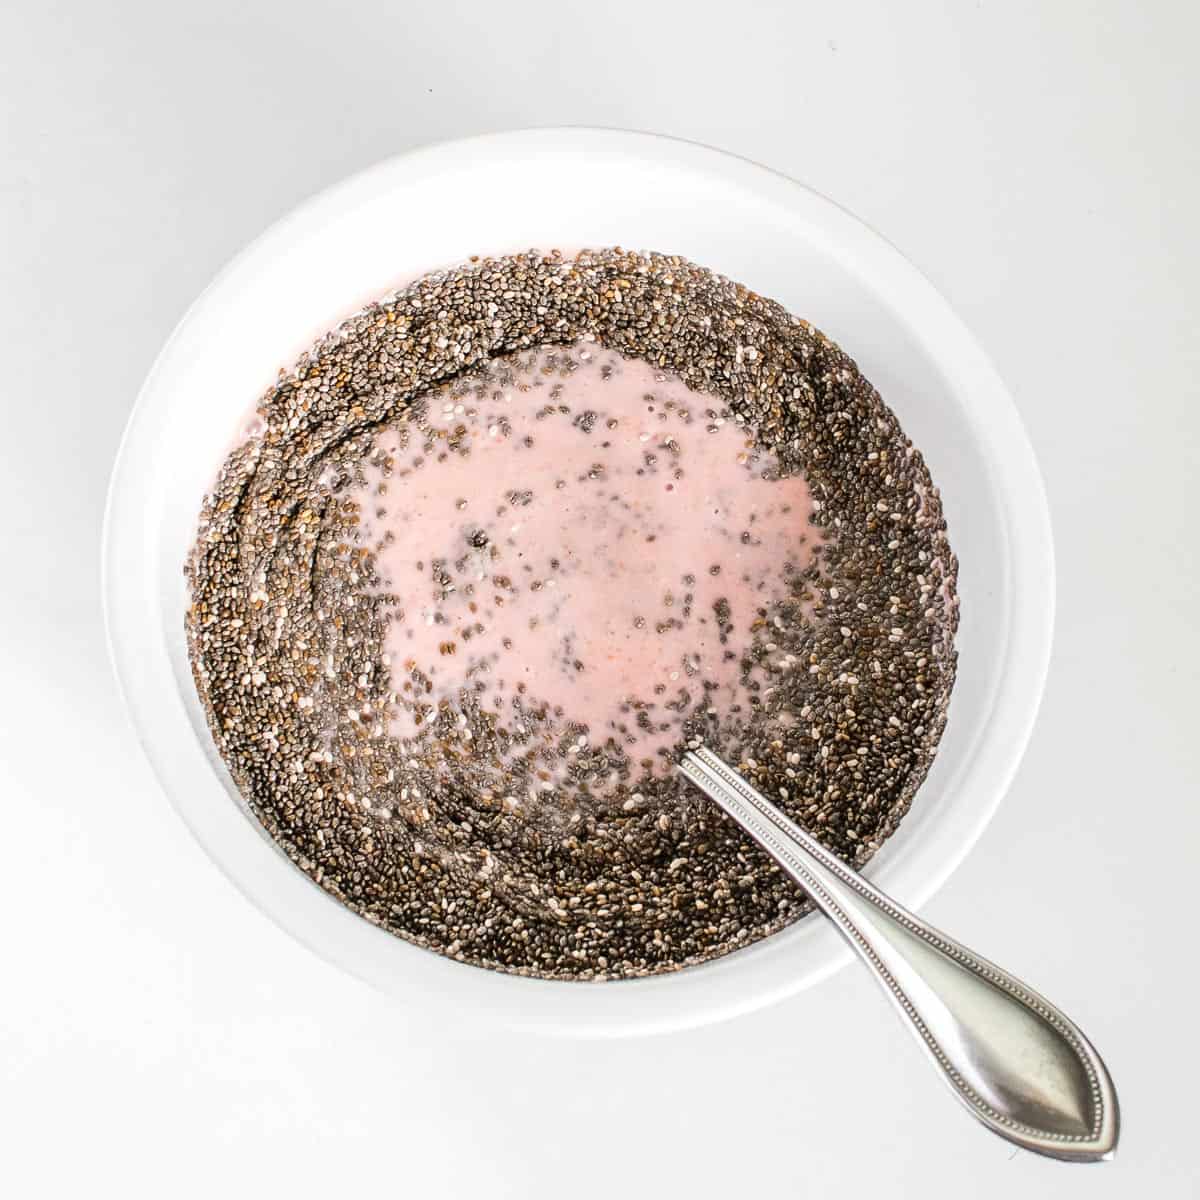 chia seeds stirred in the blended smoothie. 